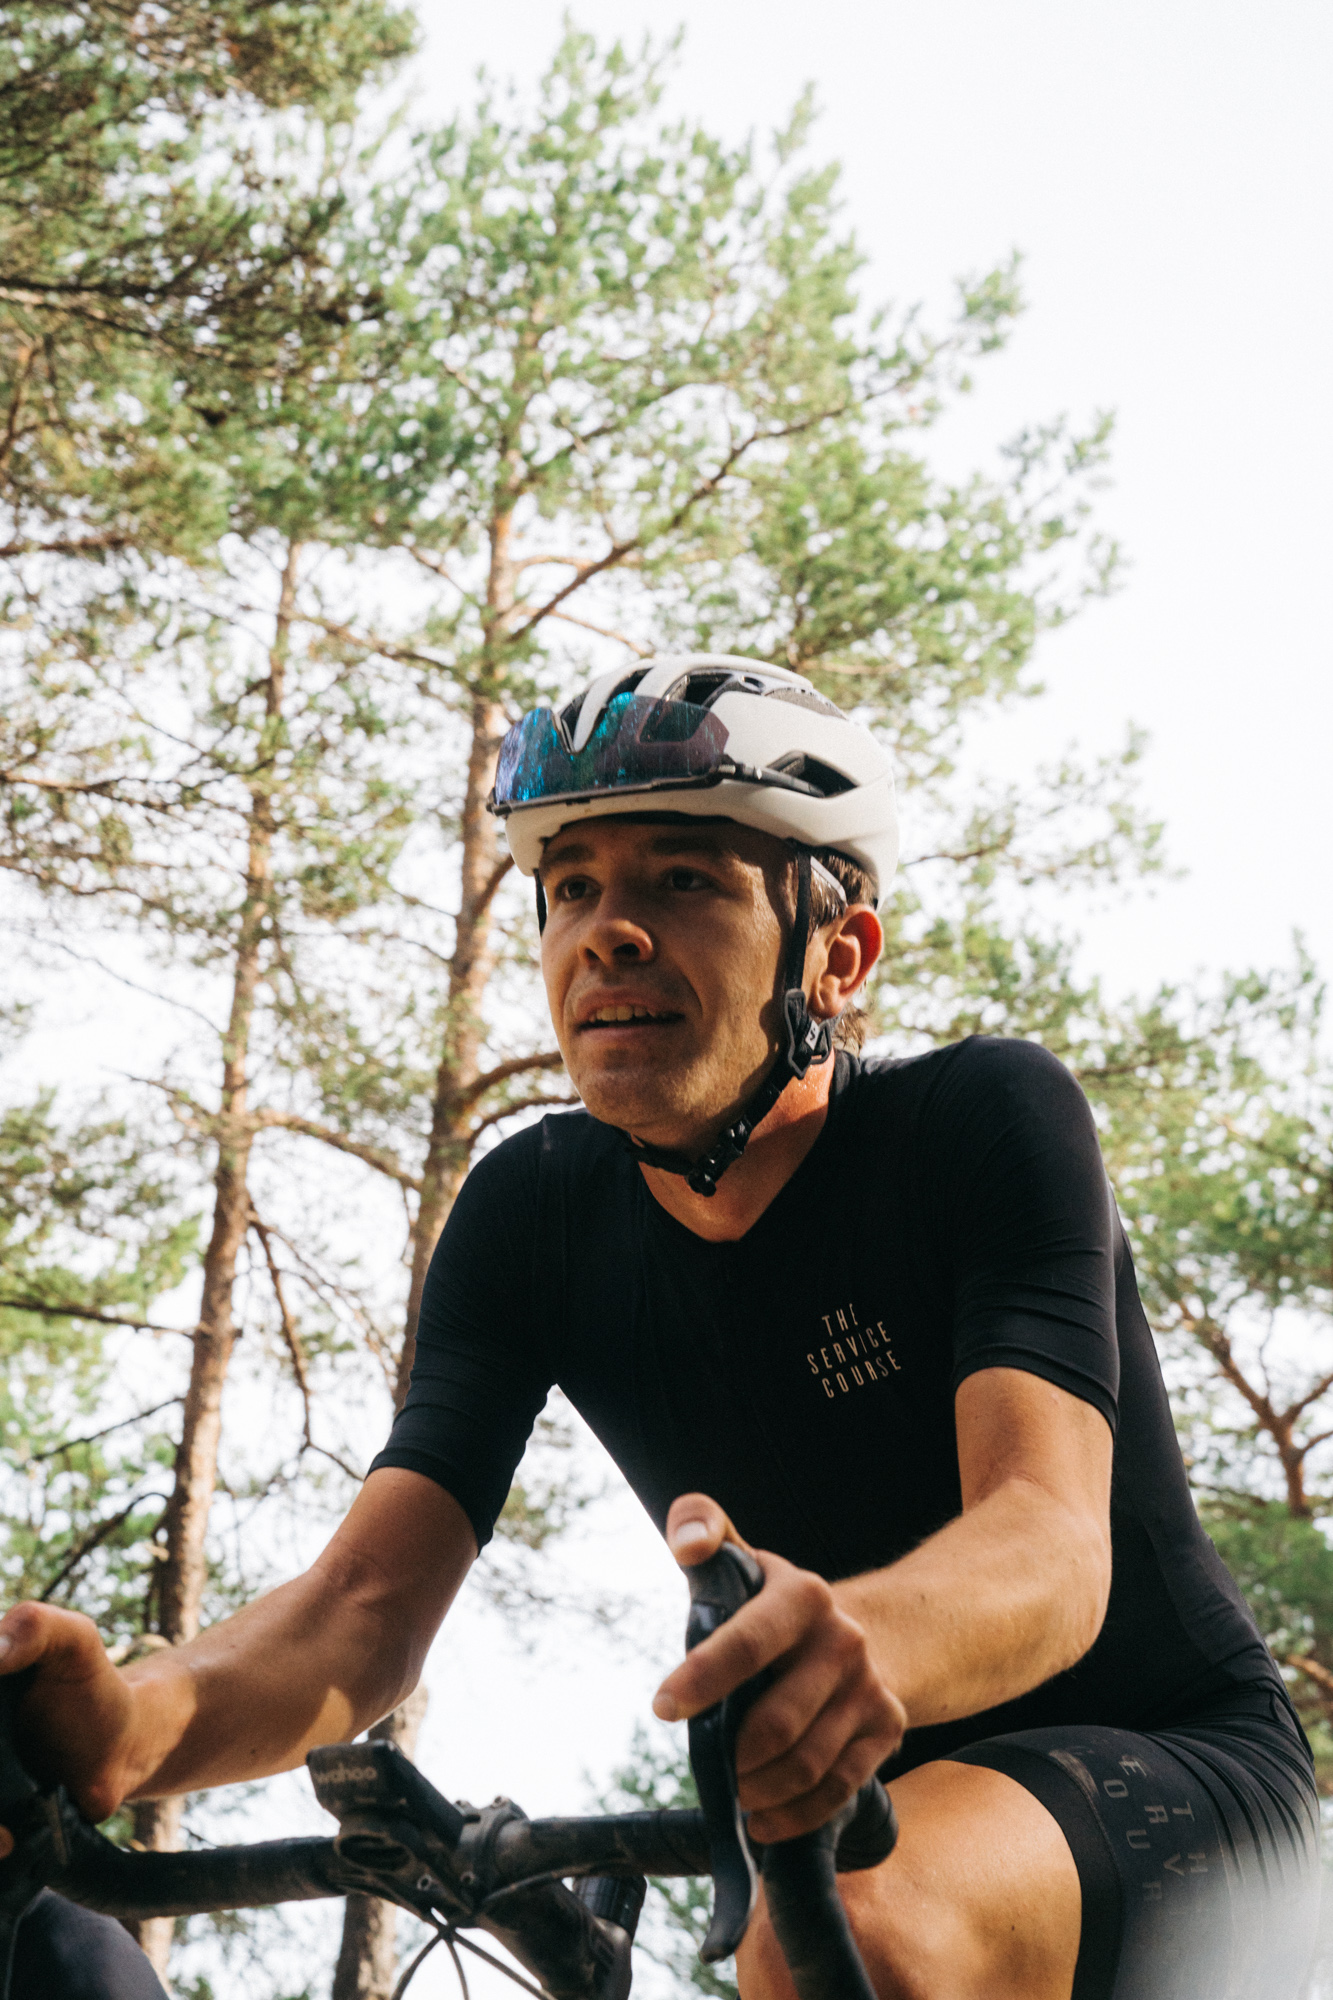 Curve Cycling on Instagram: It's back again for 2023, @theservicecourse  presents GiRodeo! To celebrate the end of Summer in Girona, the crew at The  Service Course have curated a special action-packed weekend